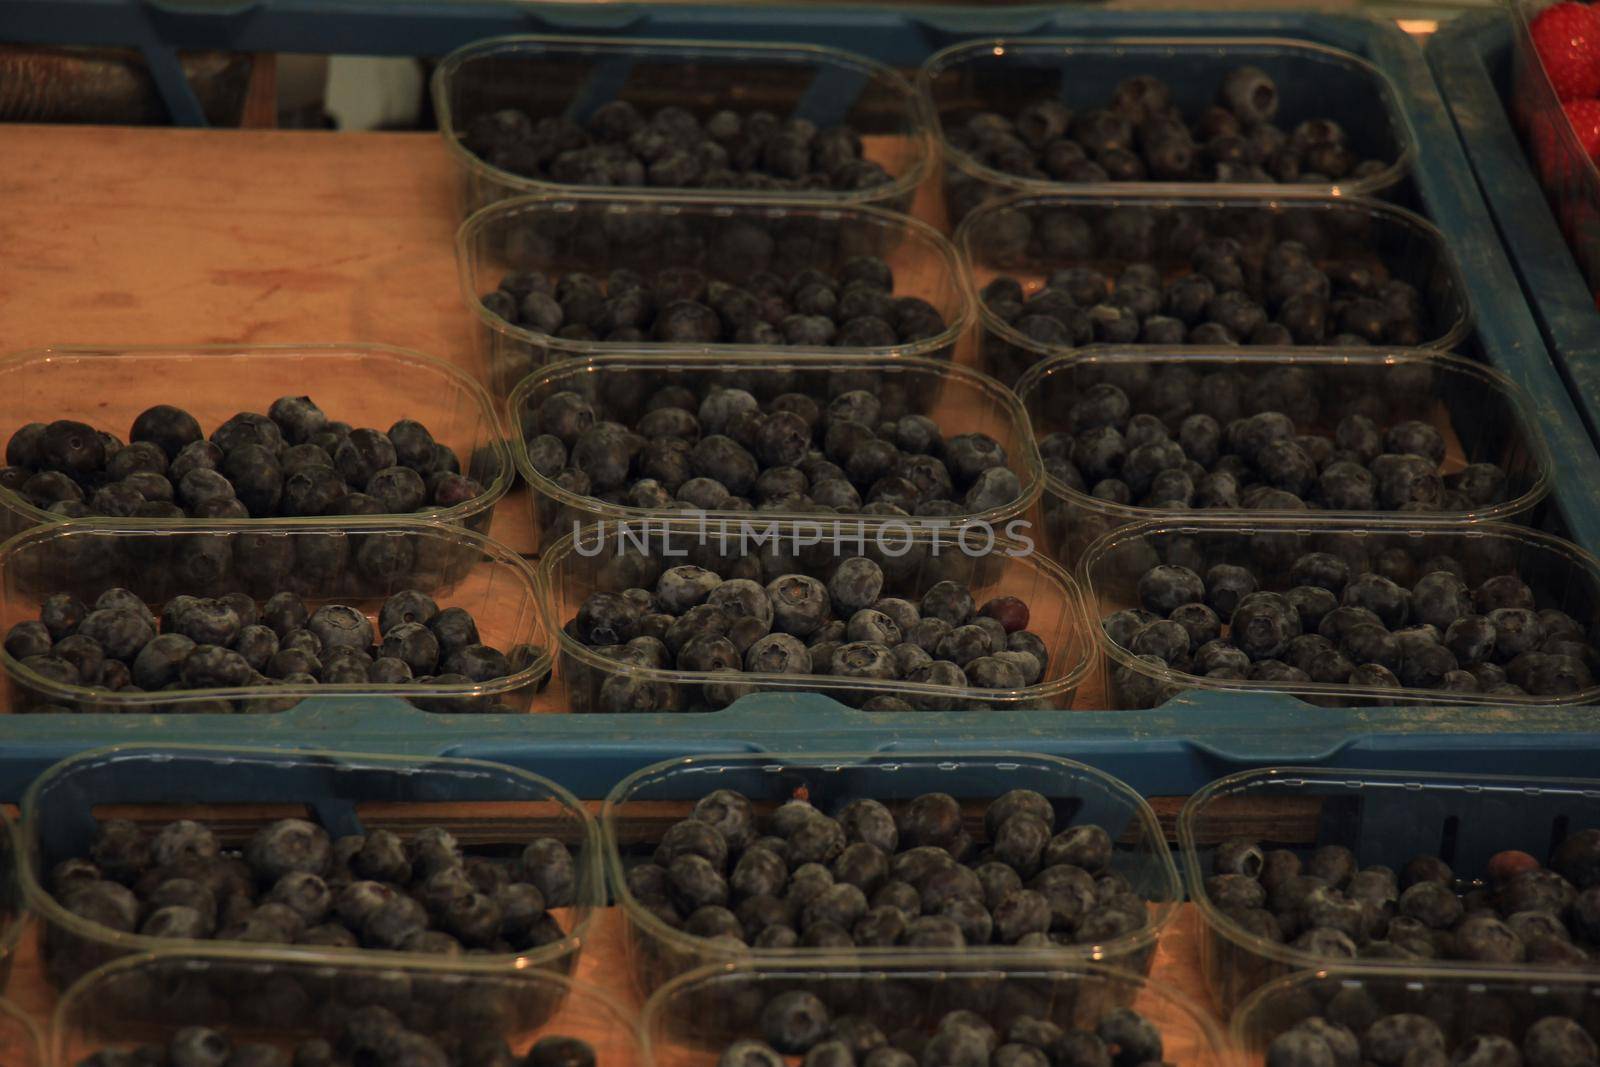 Blue berries in small boxes on a market stall